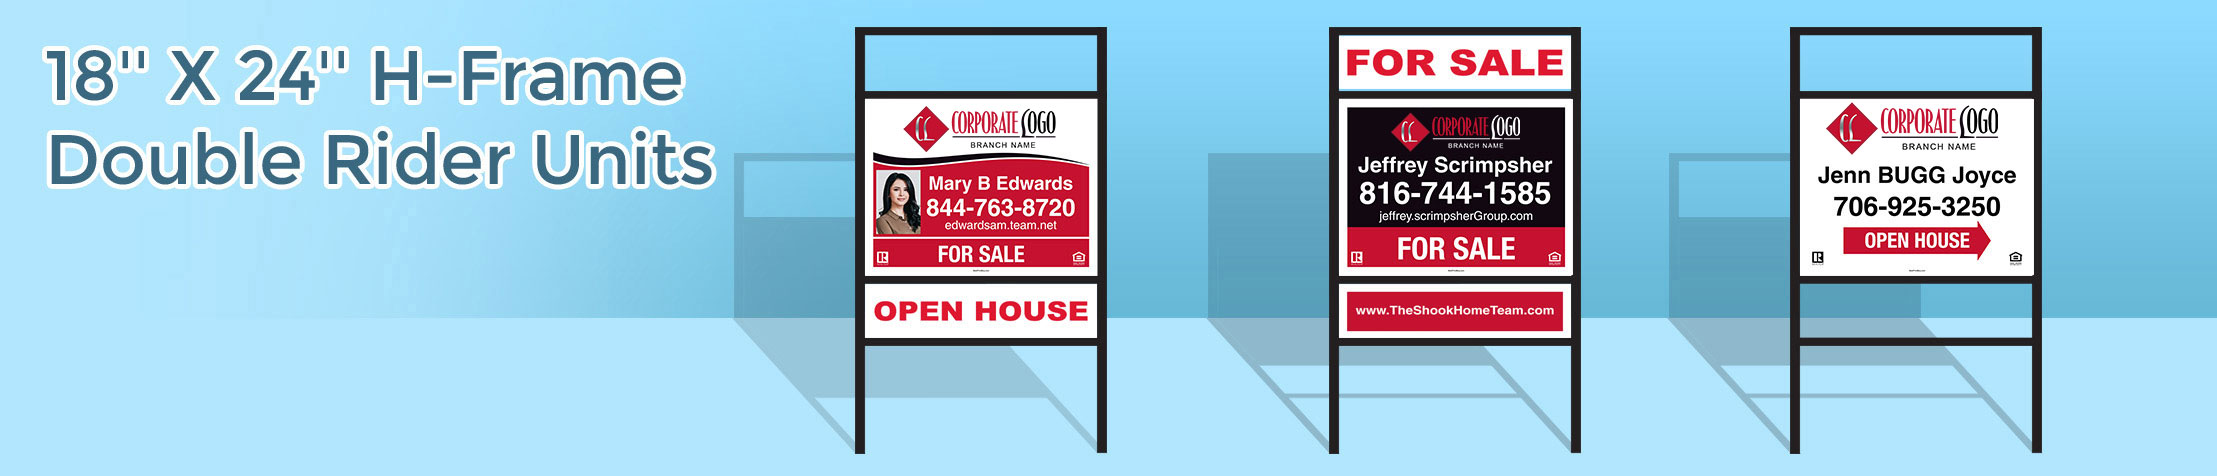 HomeSmart Real Estate 18'' x 24'' H-Frame Double Rider Units - HomeSmart Real Estate signs | BestPrintBuy.com